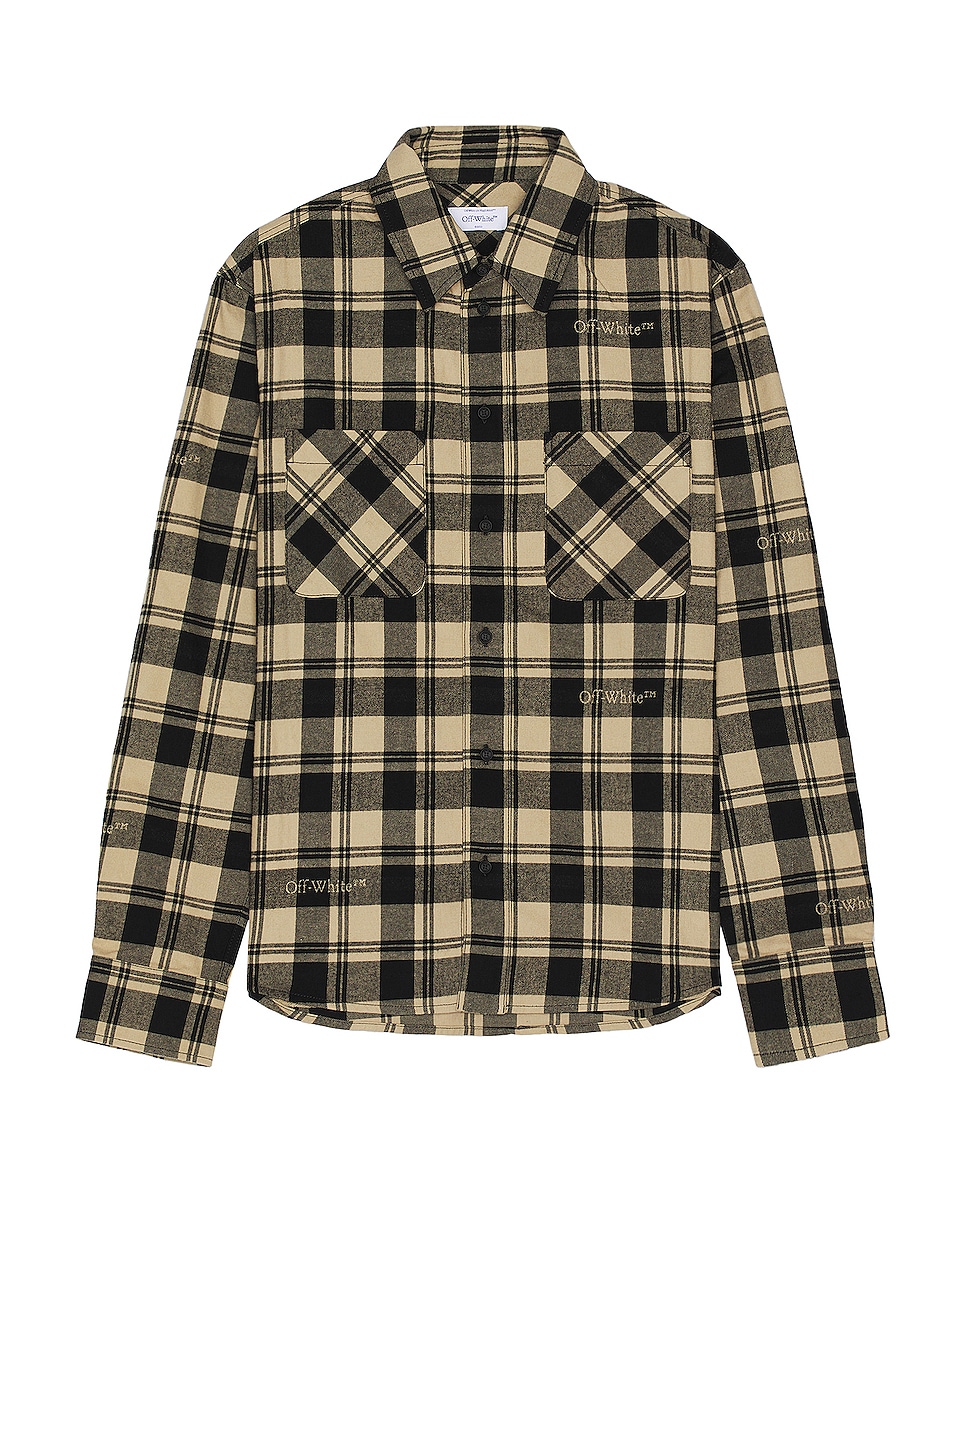 Image 1 of OFF-WHITE Check Flannel Shirt in Beige Black